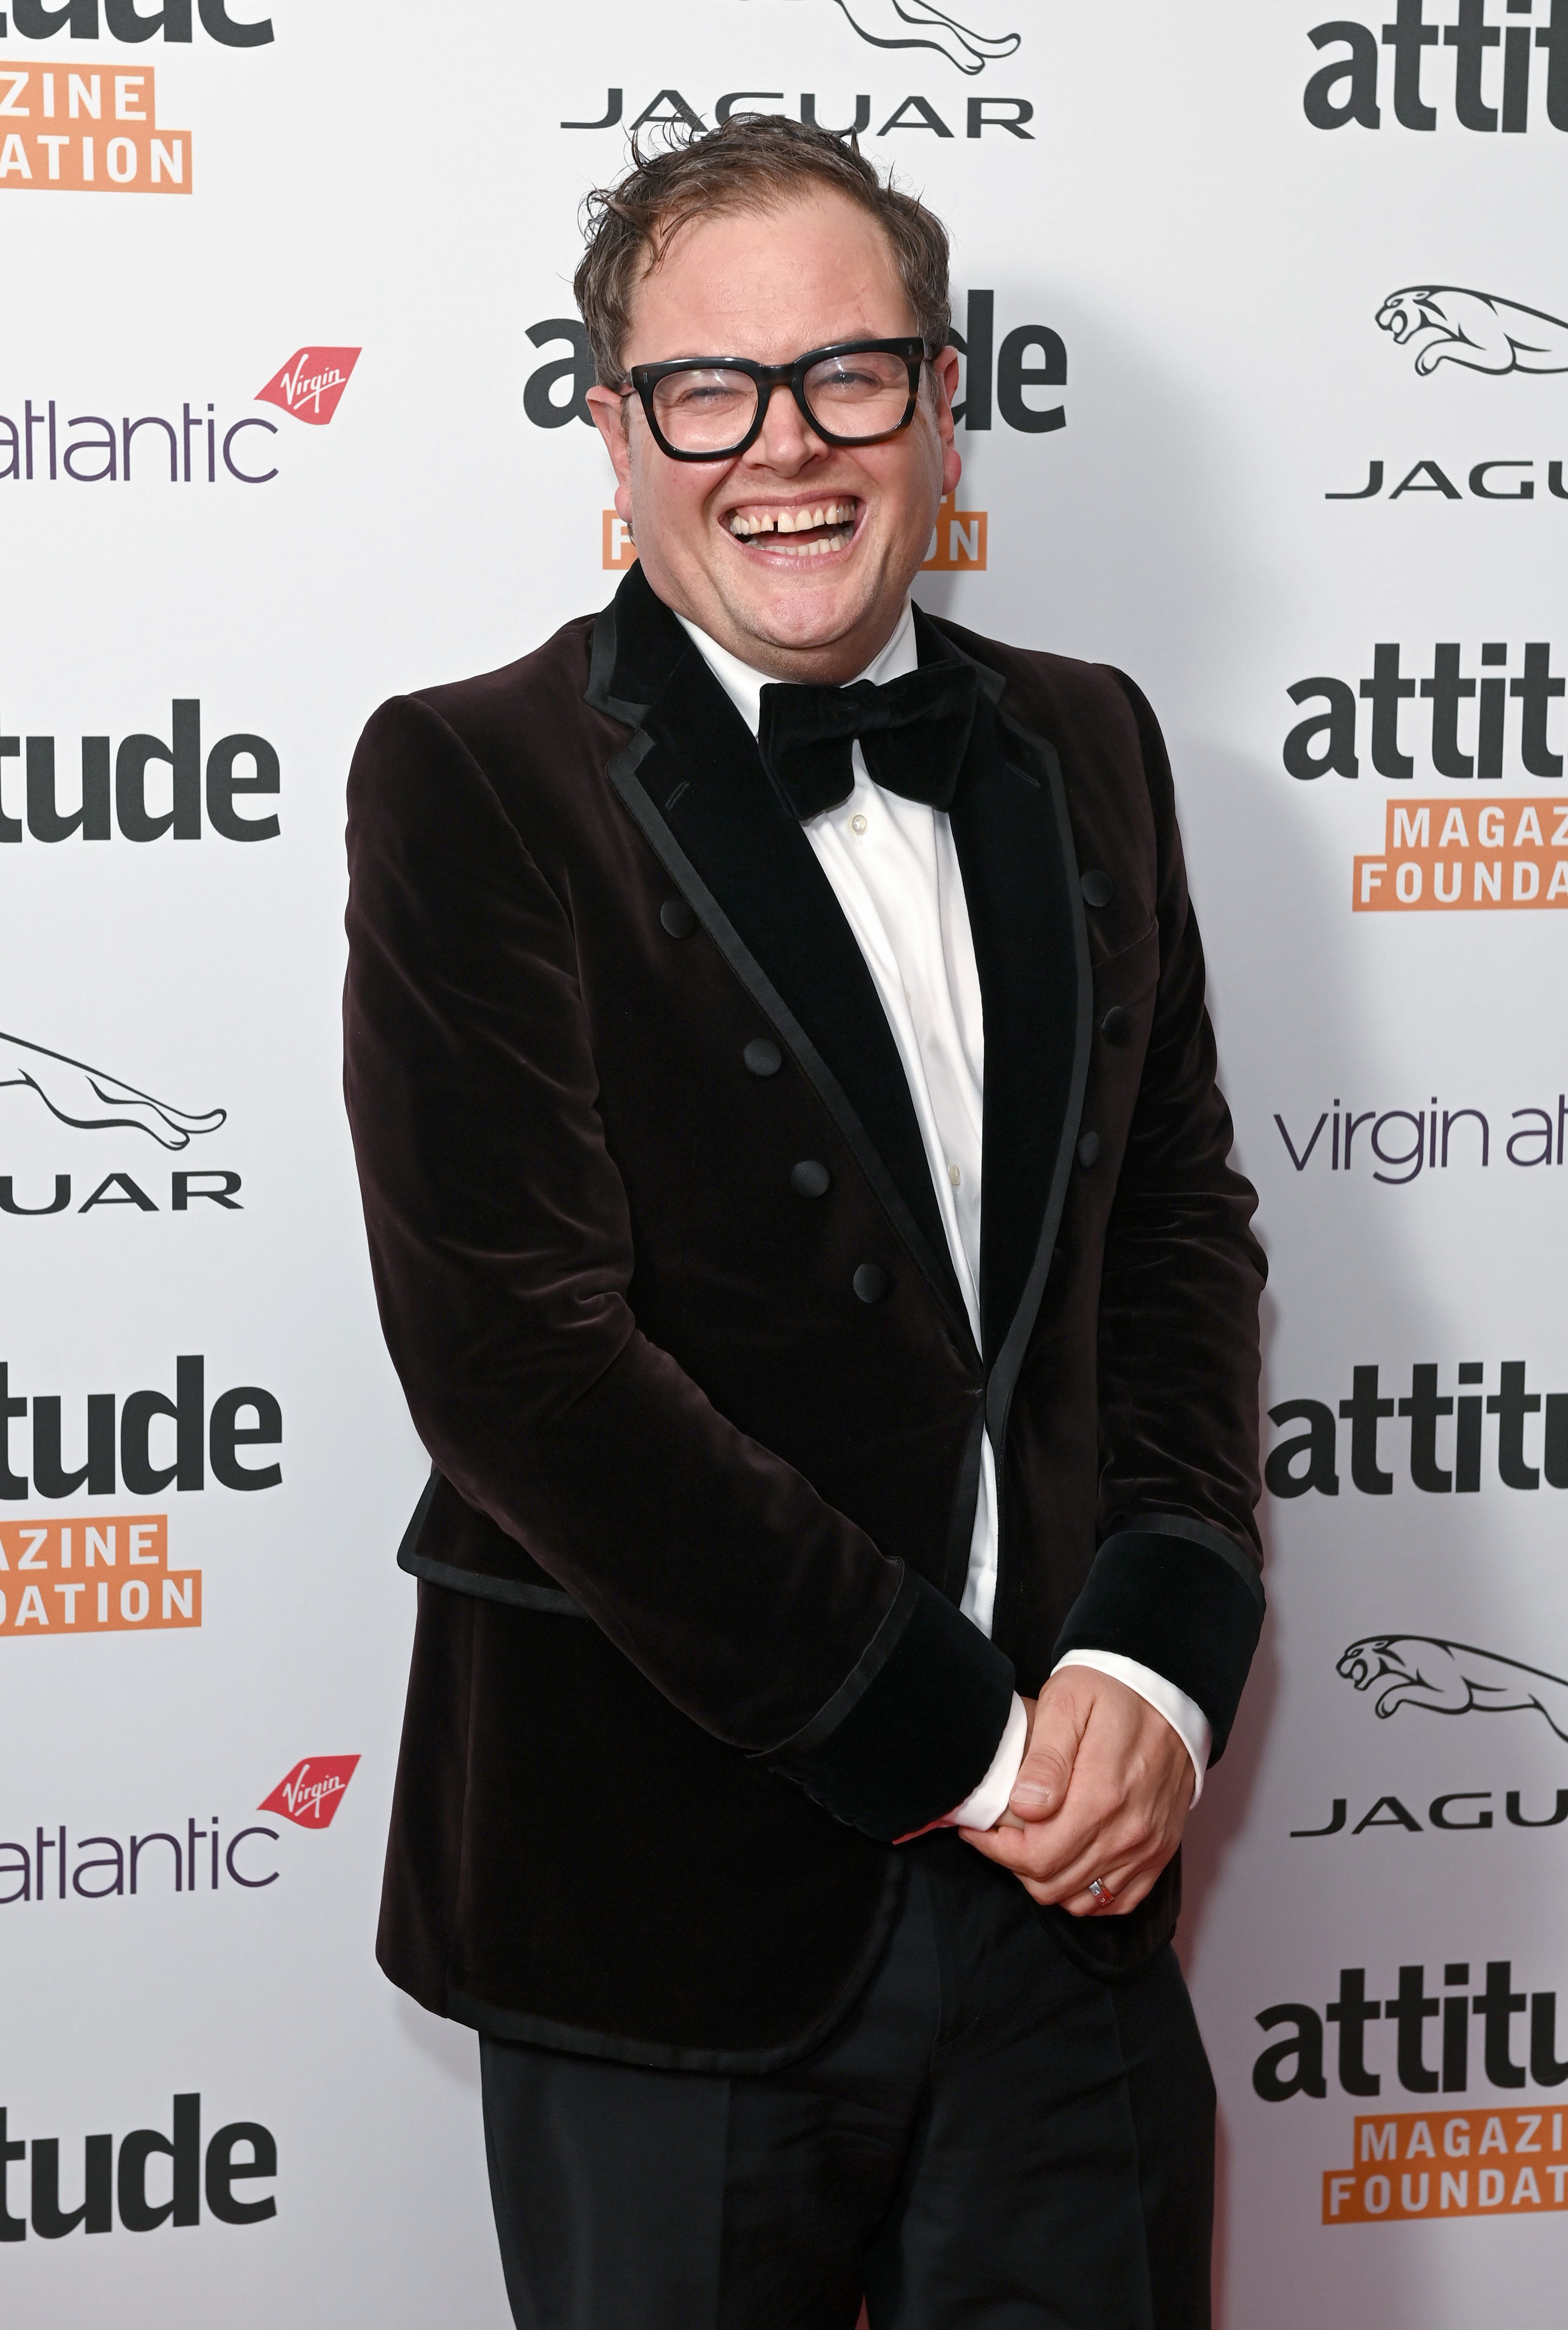 Mamma Mia 3 confirmed: Comedian Alan Carr drops exciting details - The  Economic Times